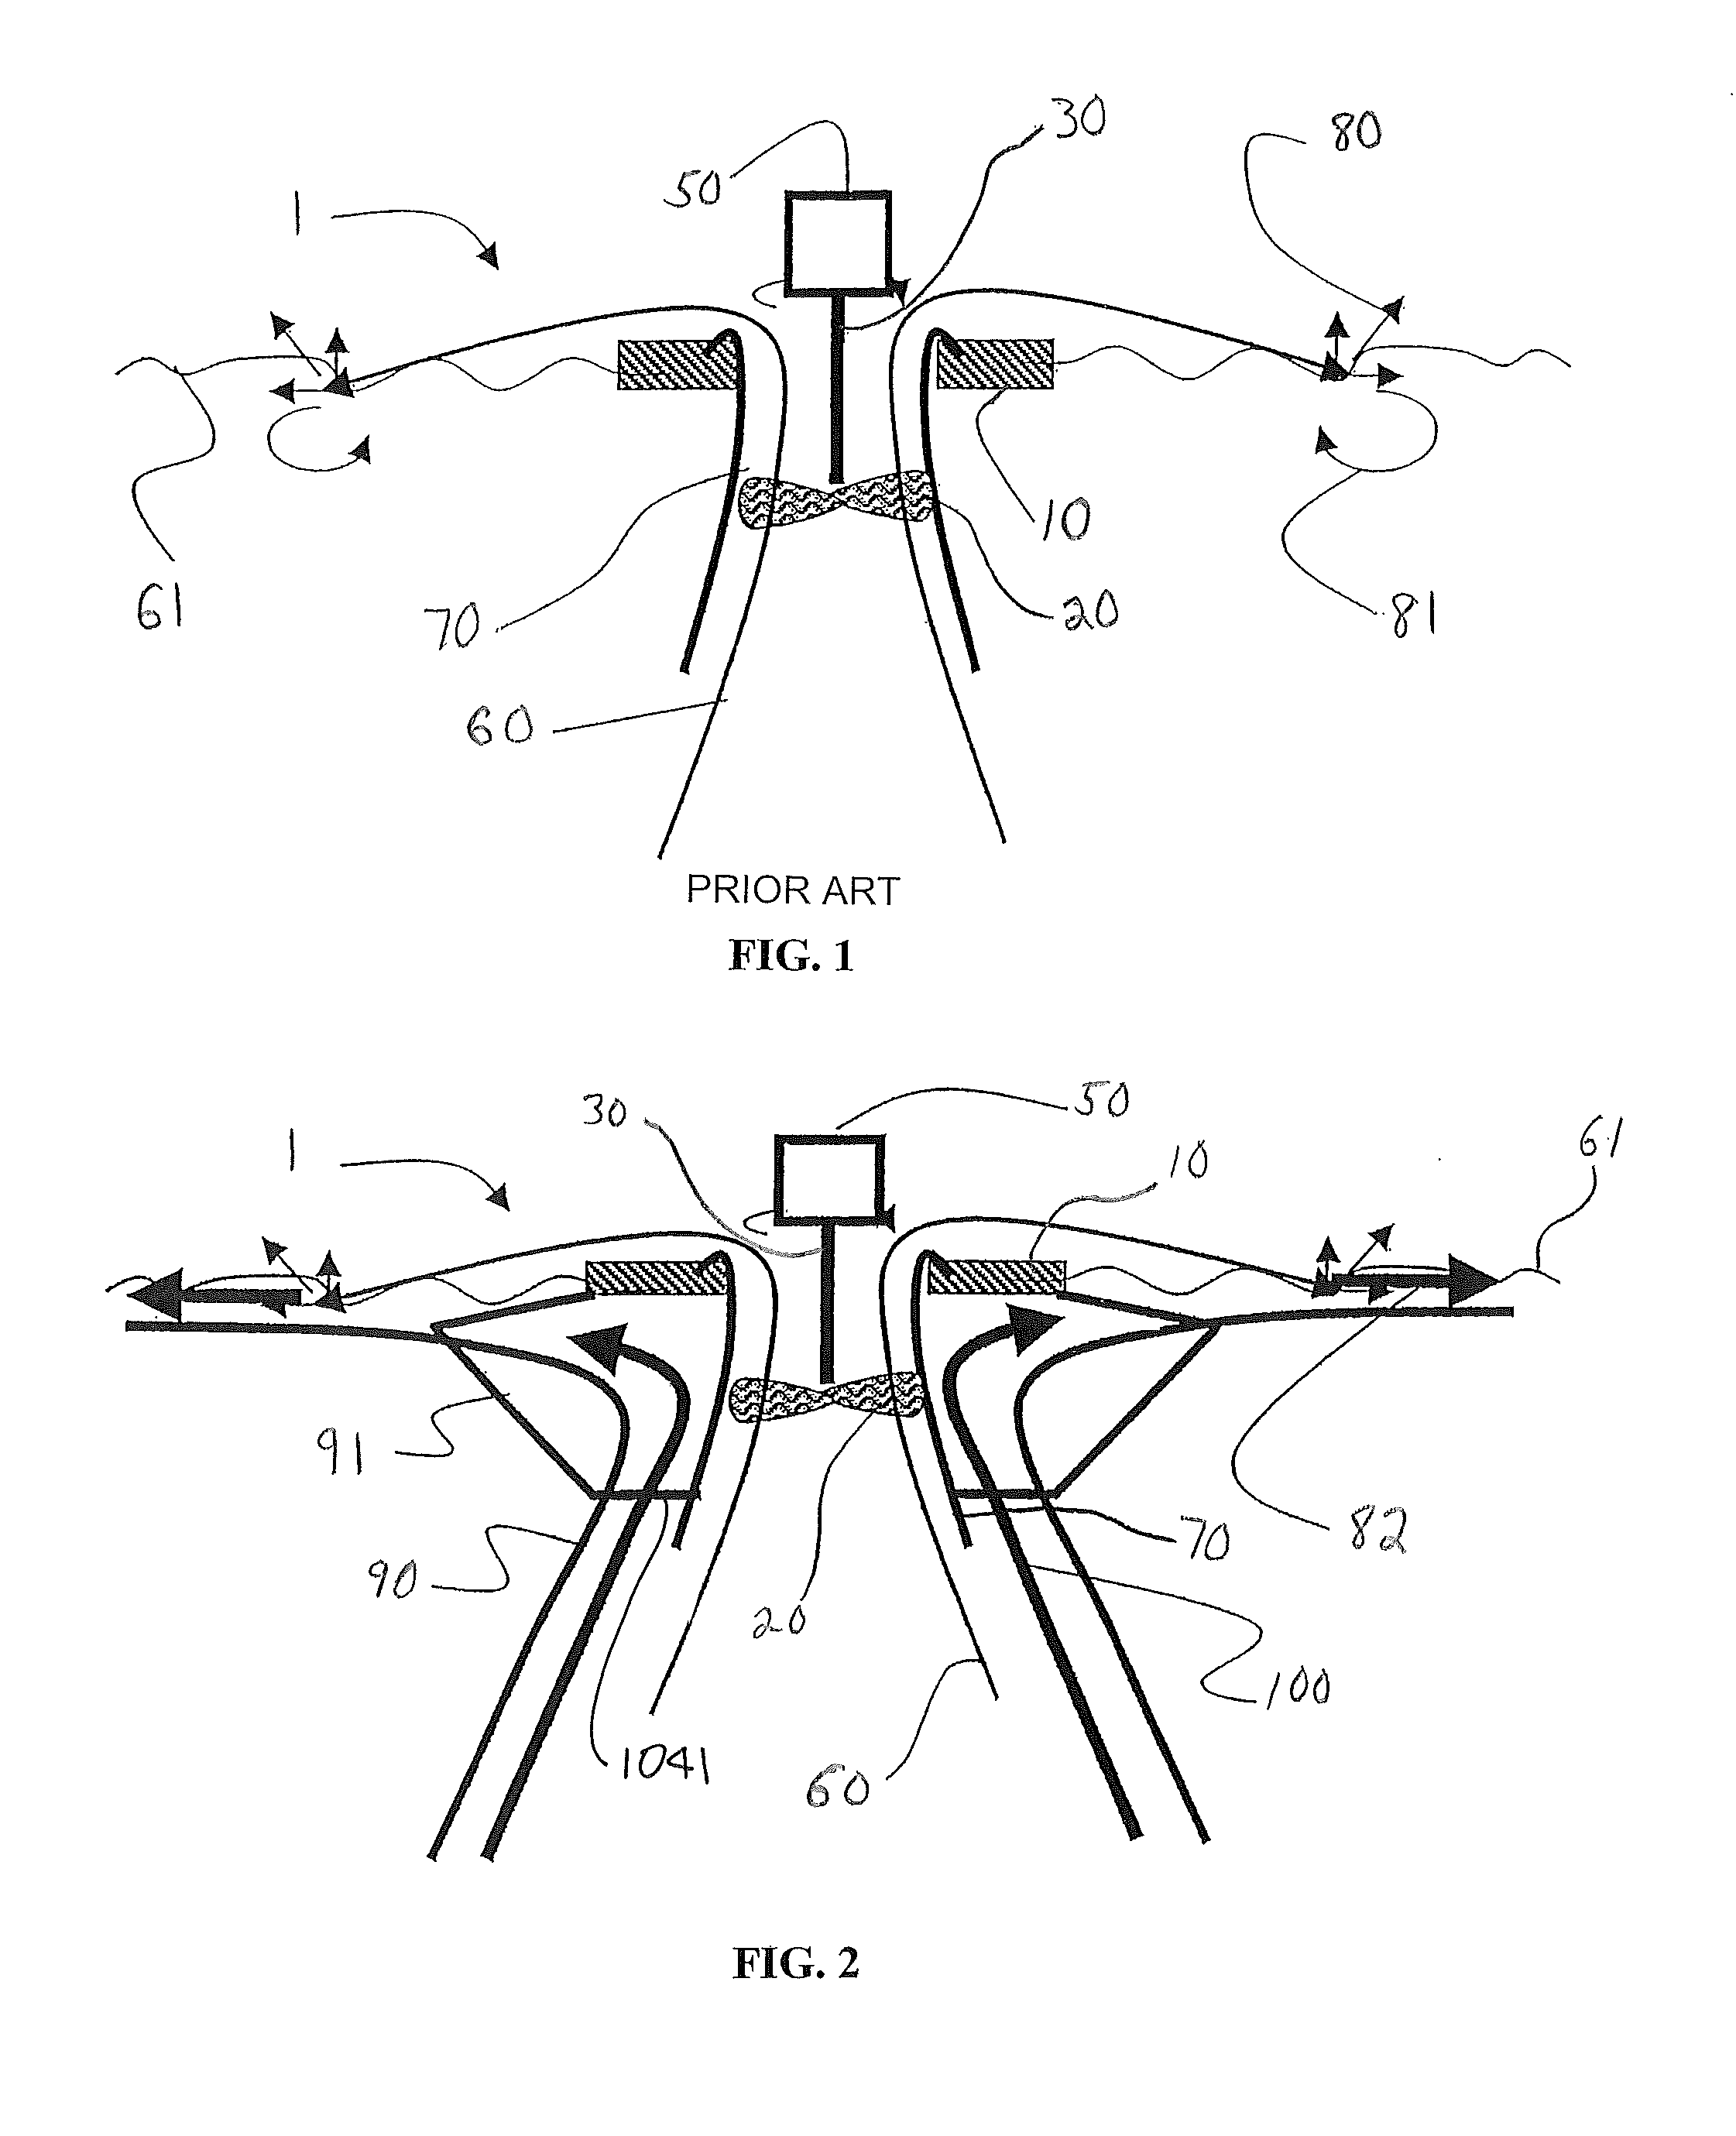 Apparatus for surface mixing of gasses and liquids